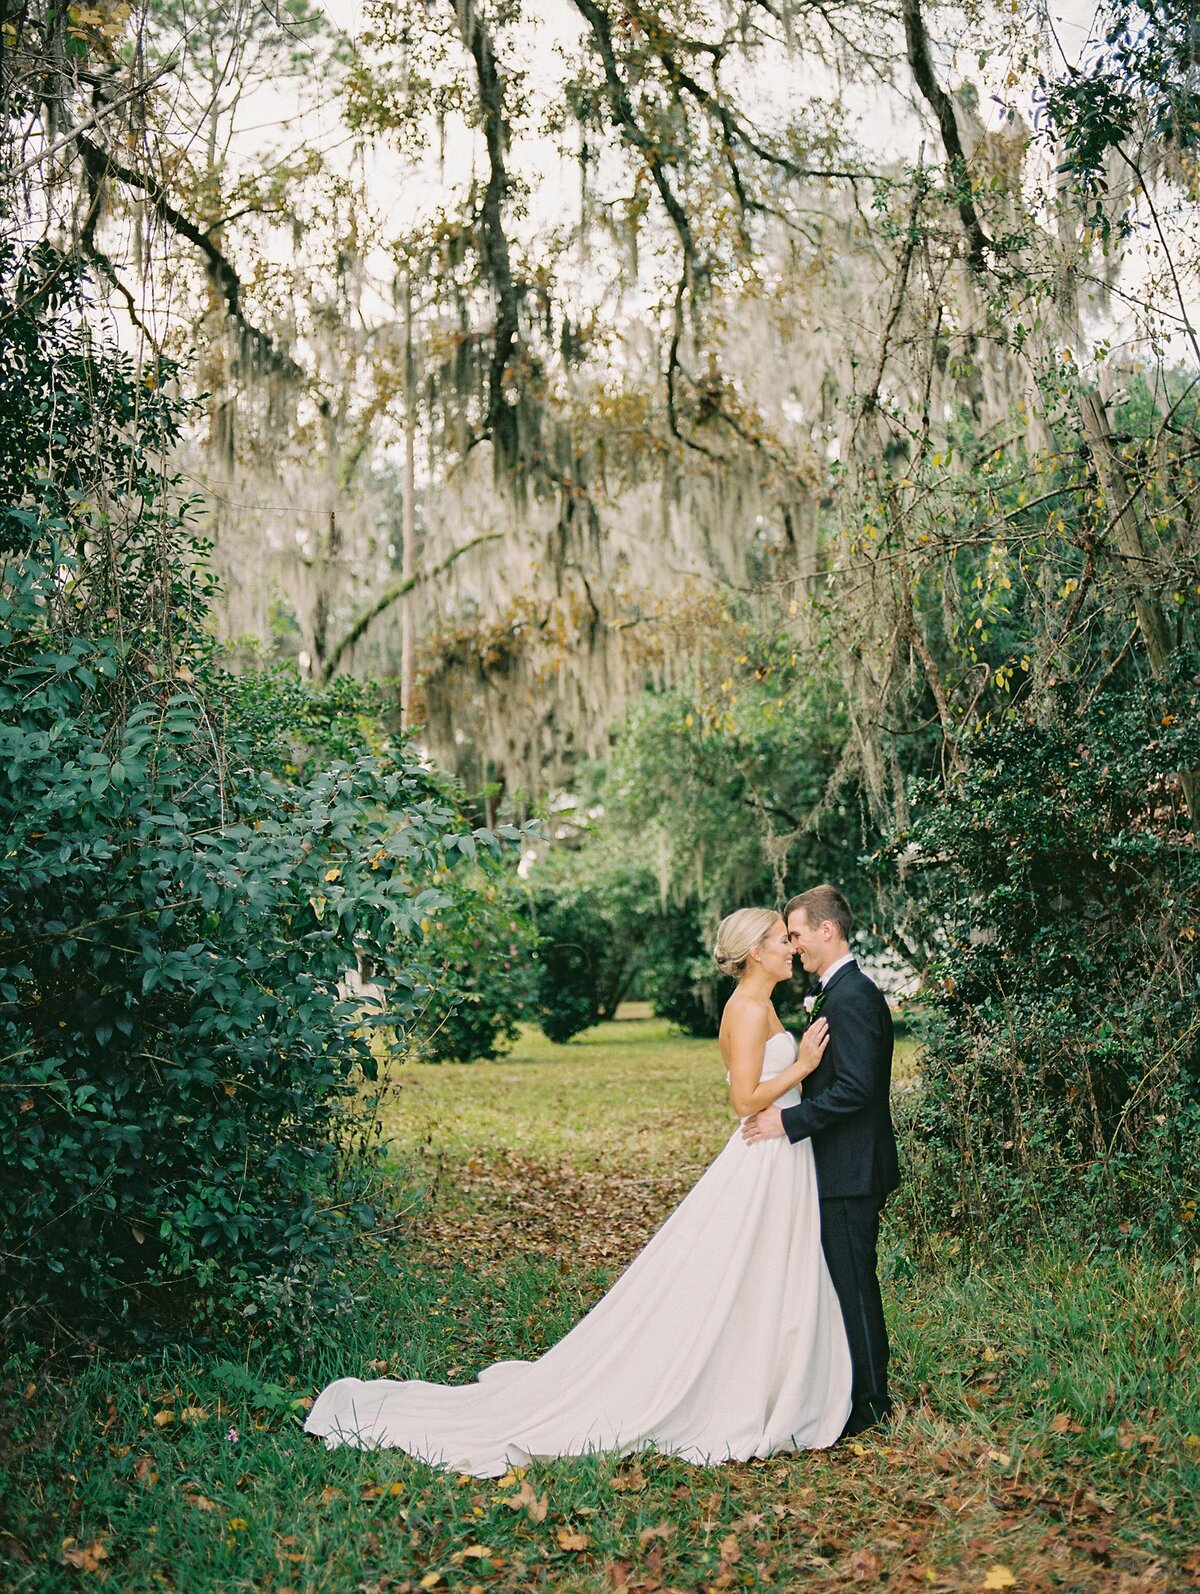 A wedding at Southwood in Tallahassee, FL - 11